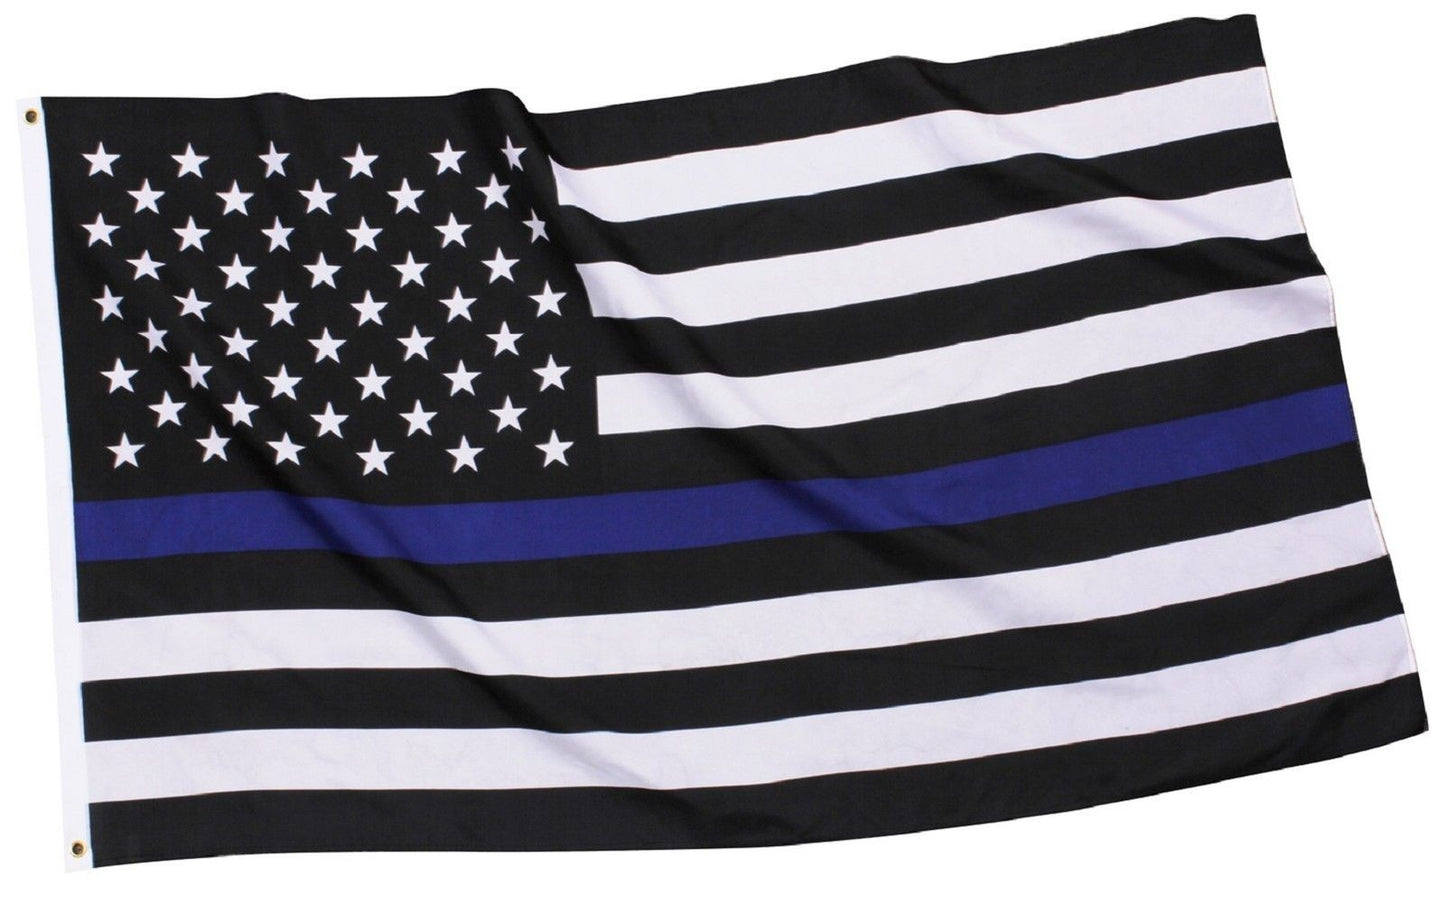 The Thin Blue Line Police Support Decorative USA Flag -Rothco 5 Foot Police Flag